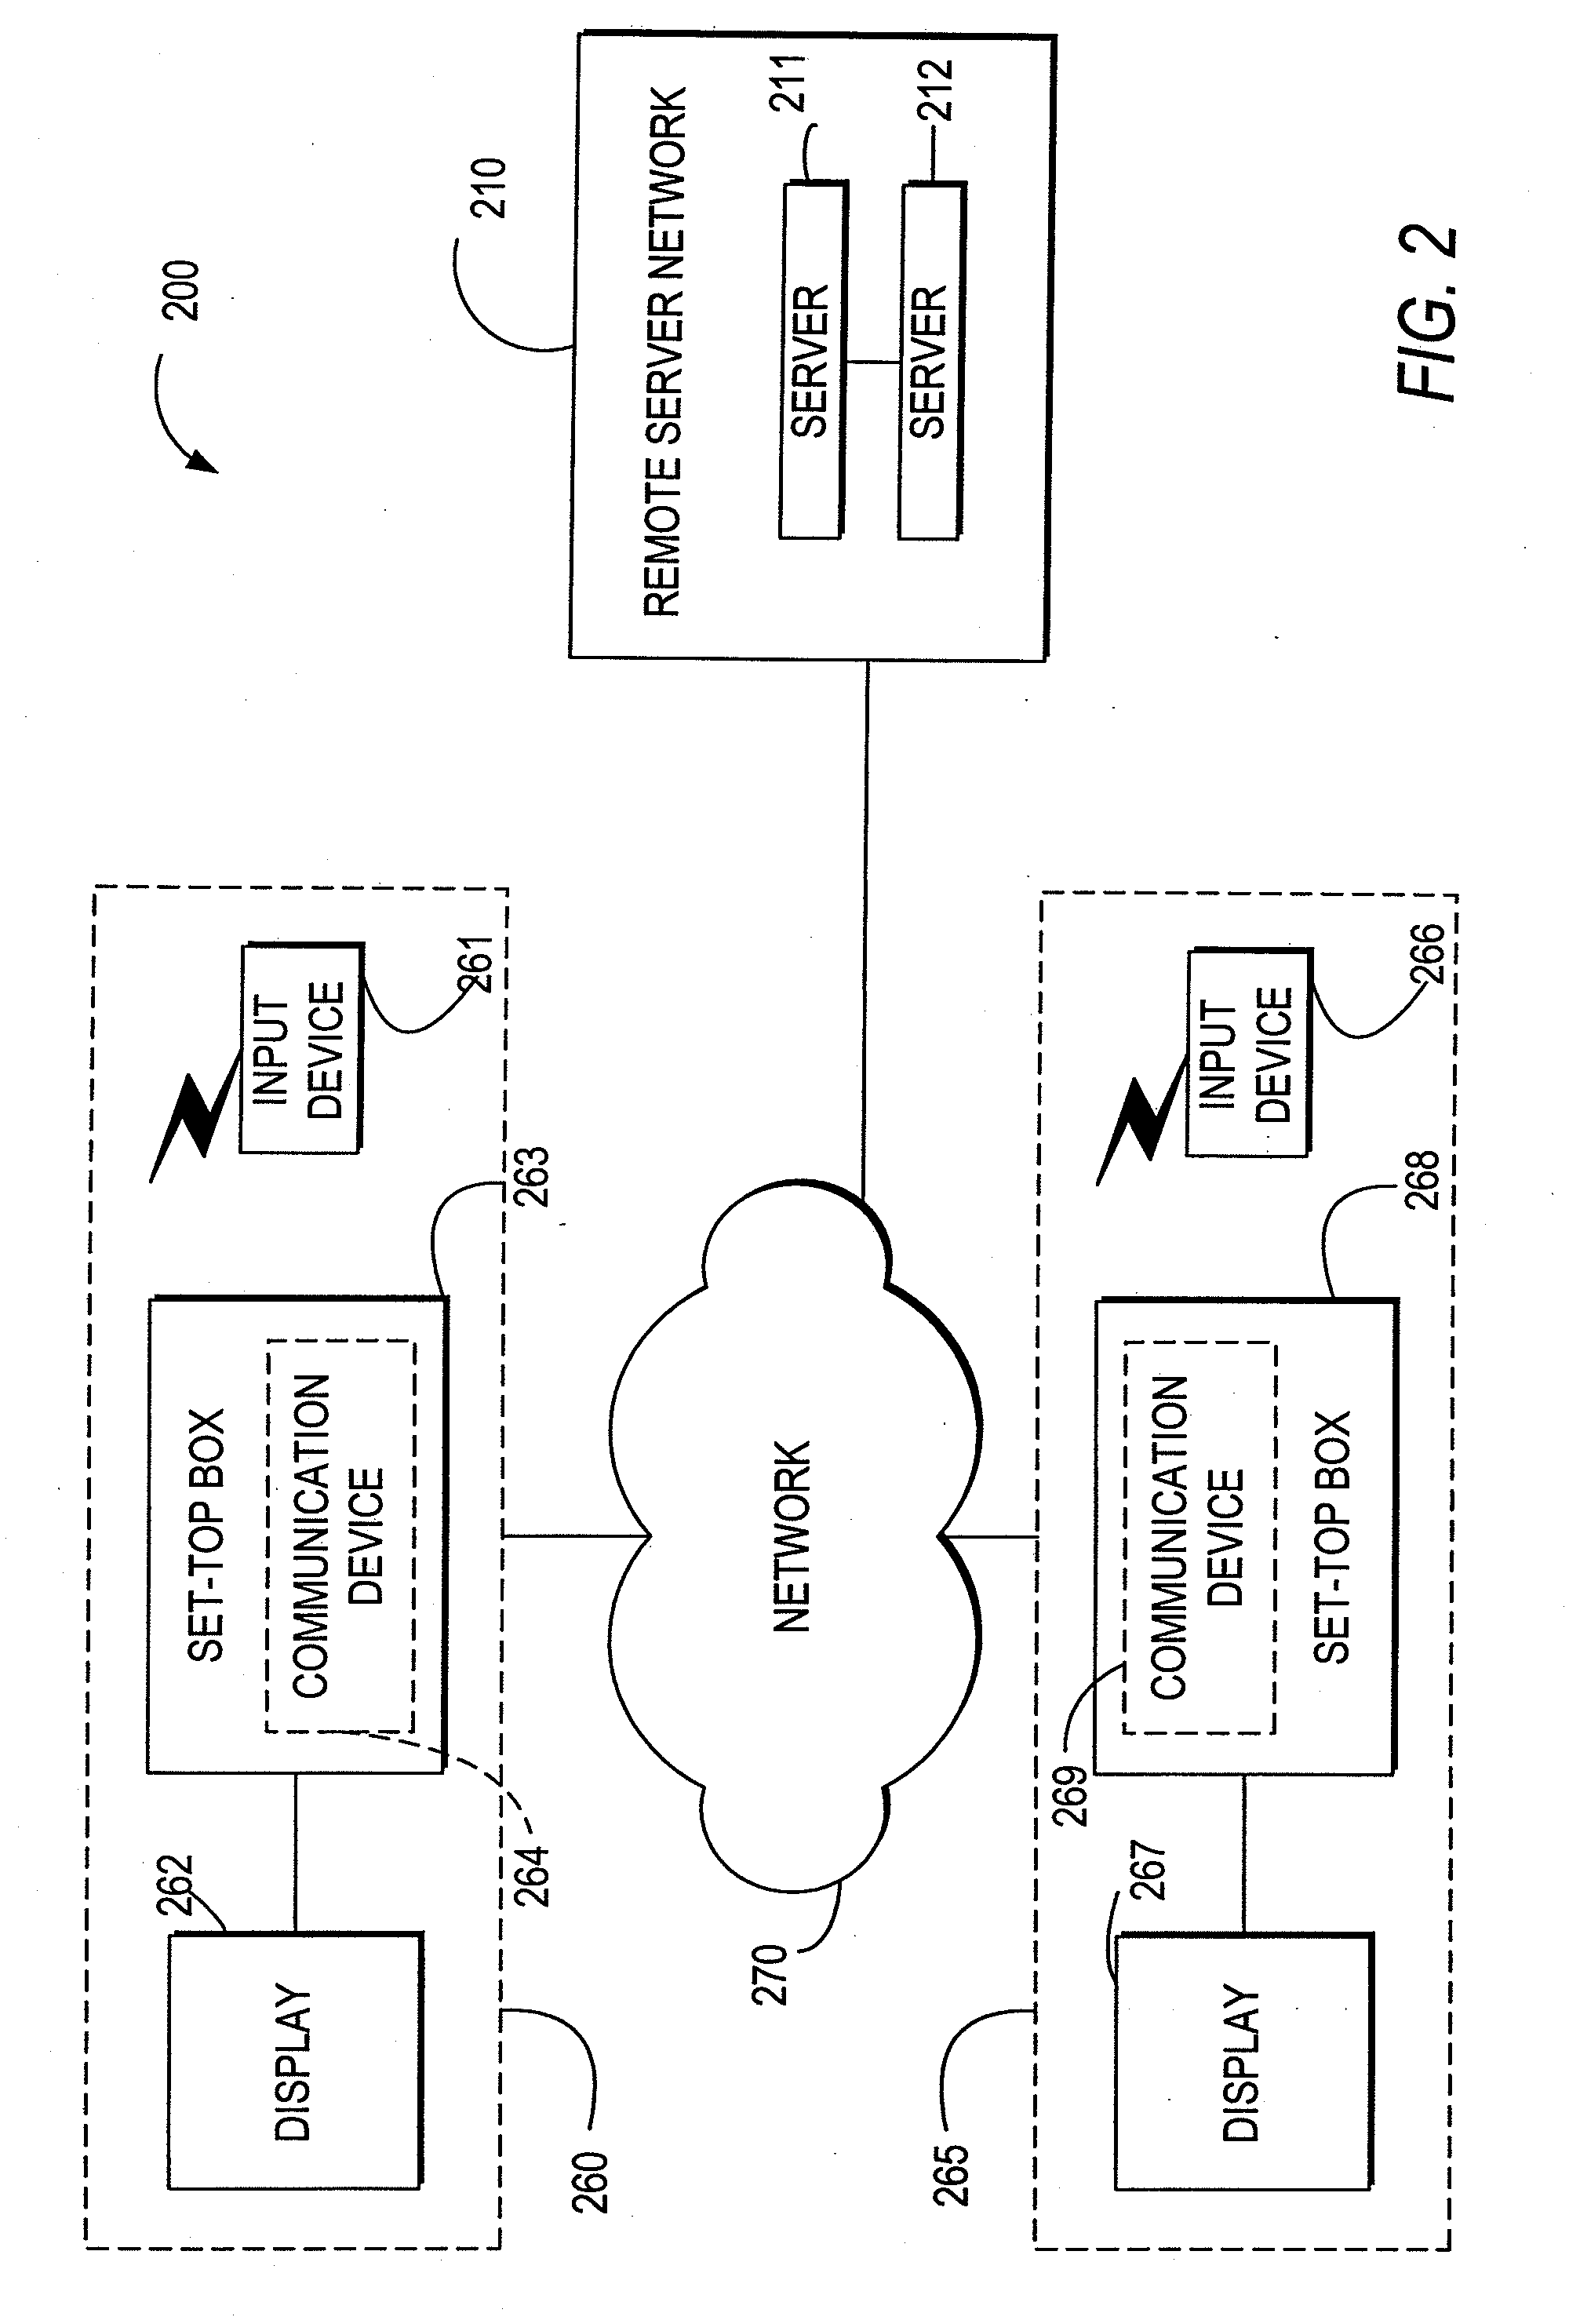 Systems and methods for providing storage of data on servers in an on-demand media delivery system